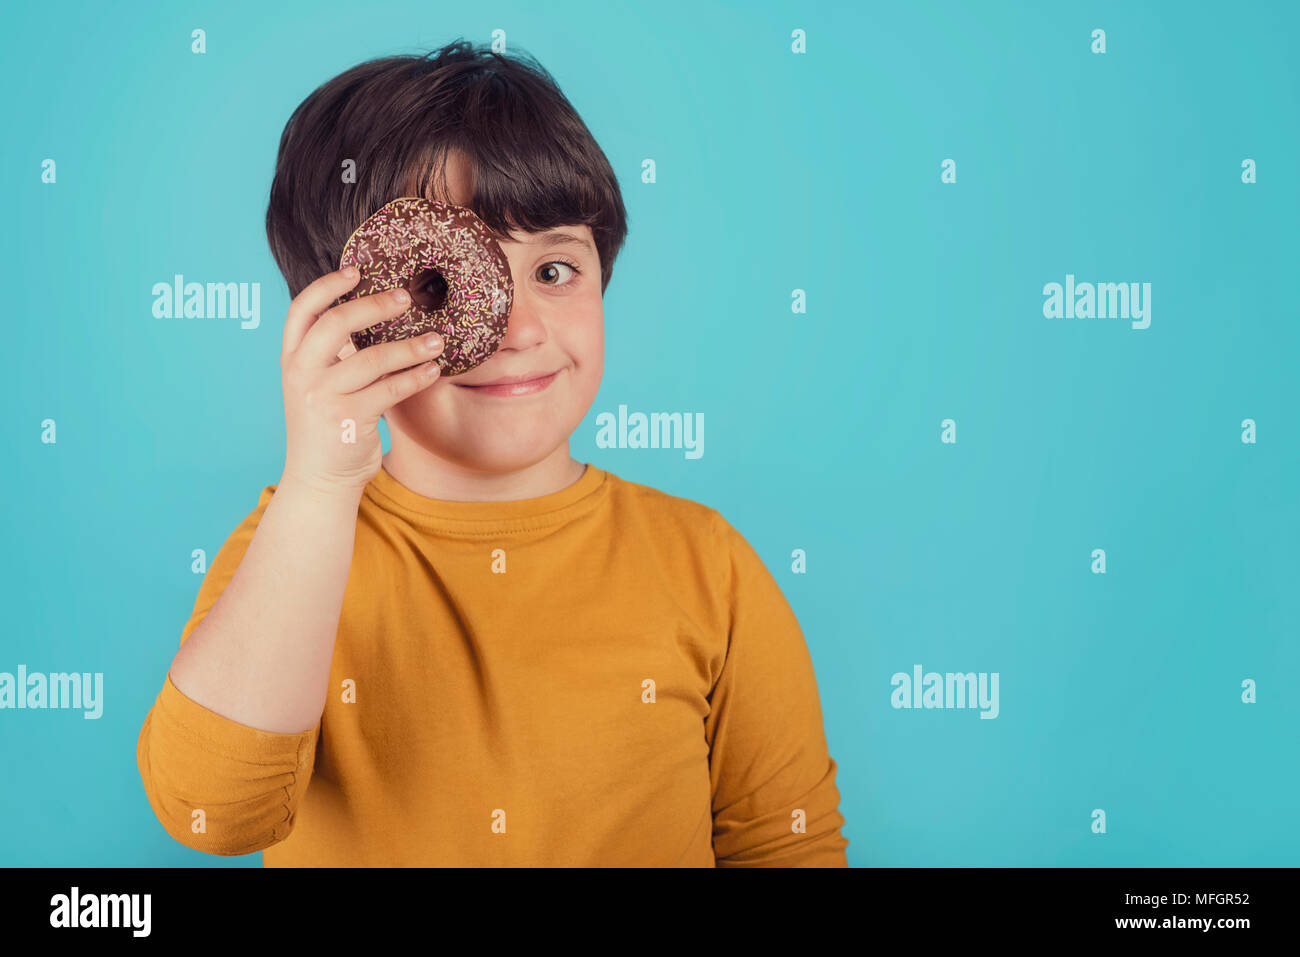 smiling boy holding donuts over her eye smiling boy holding donuts over her eye Stock Photo